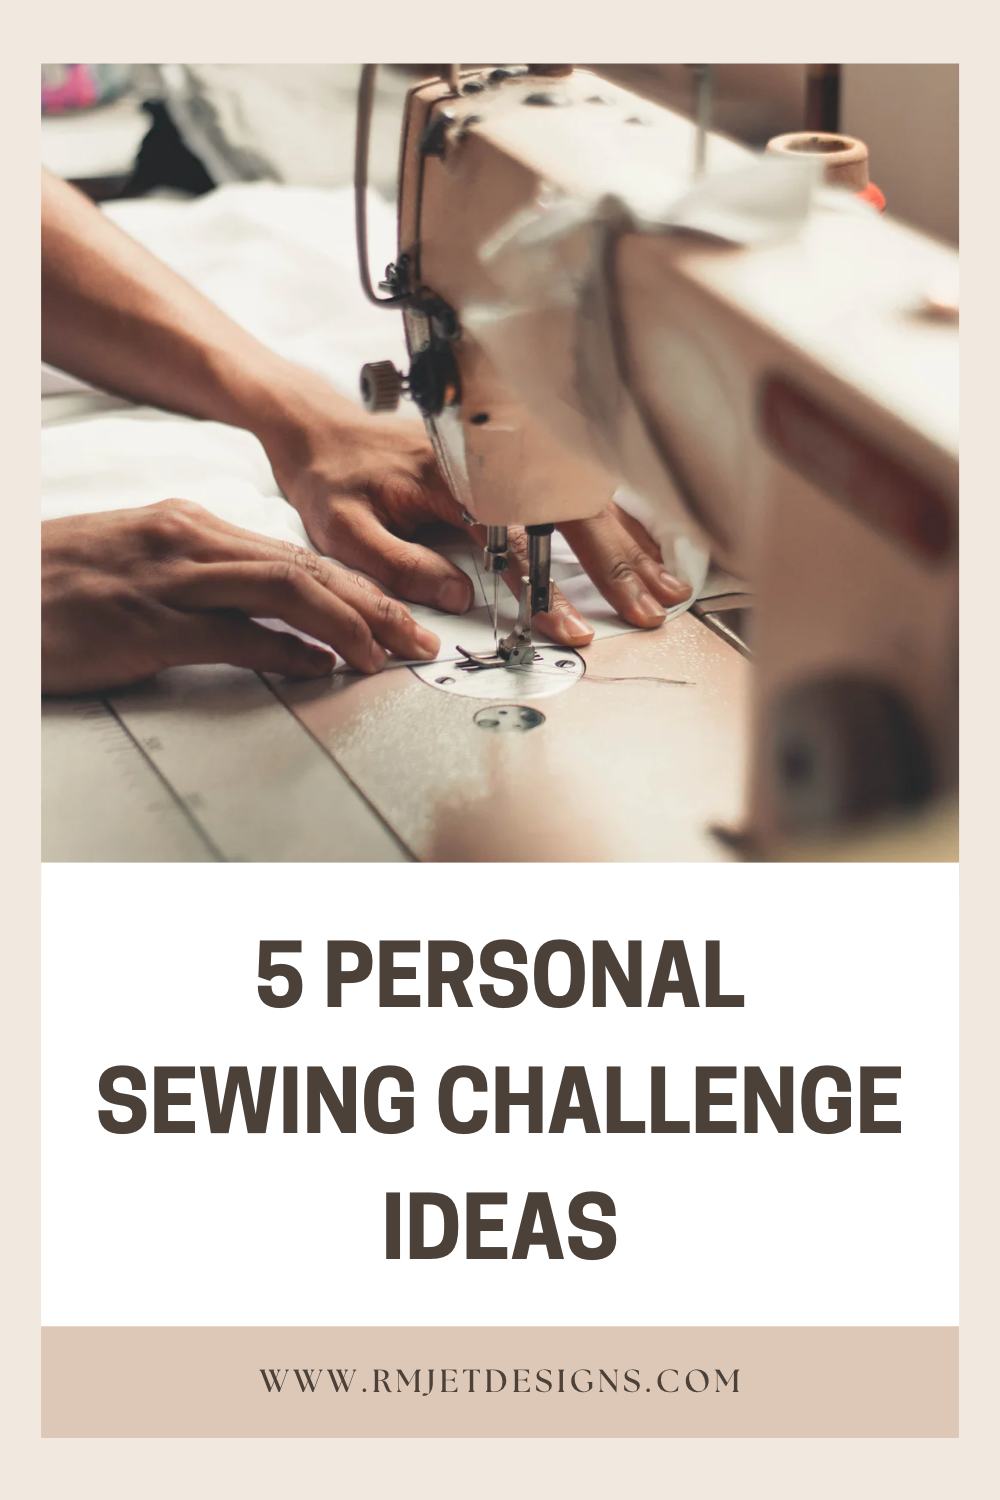 5 Personal Sewing Challenge Ideas by RMJETdesigns